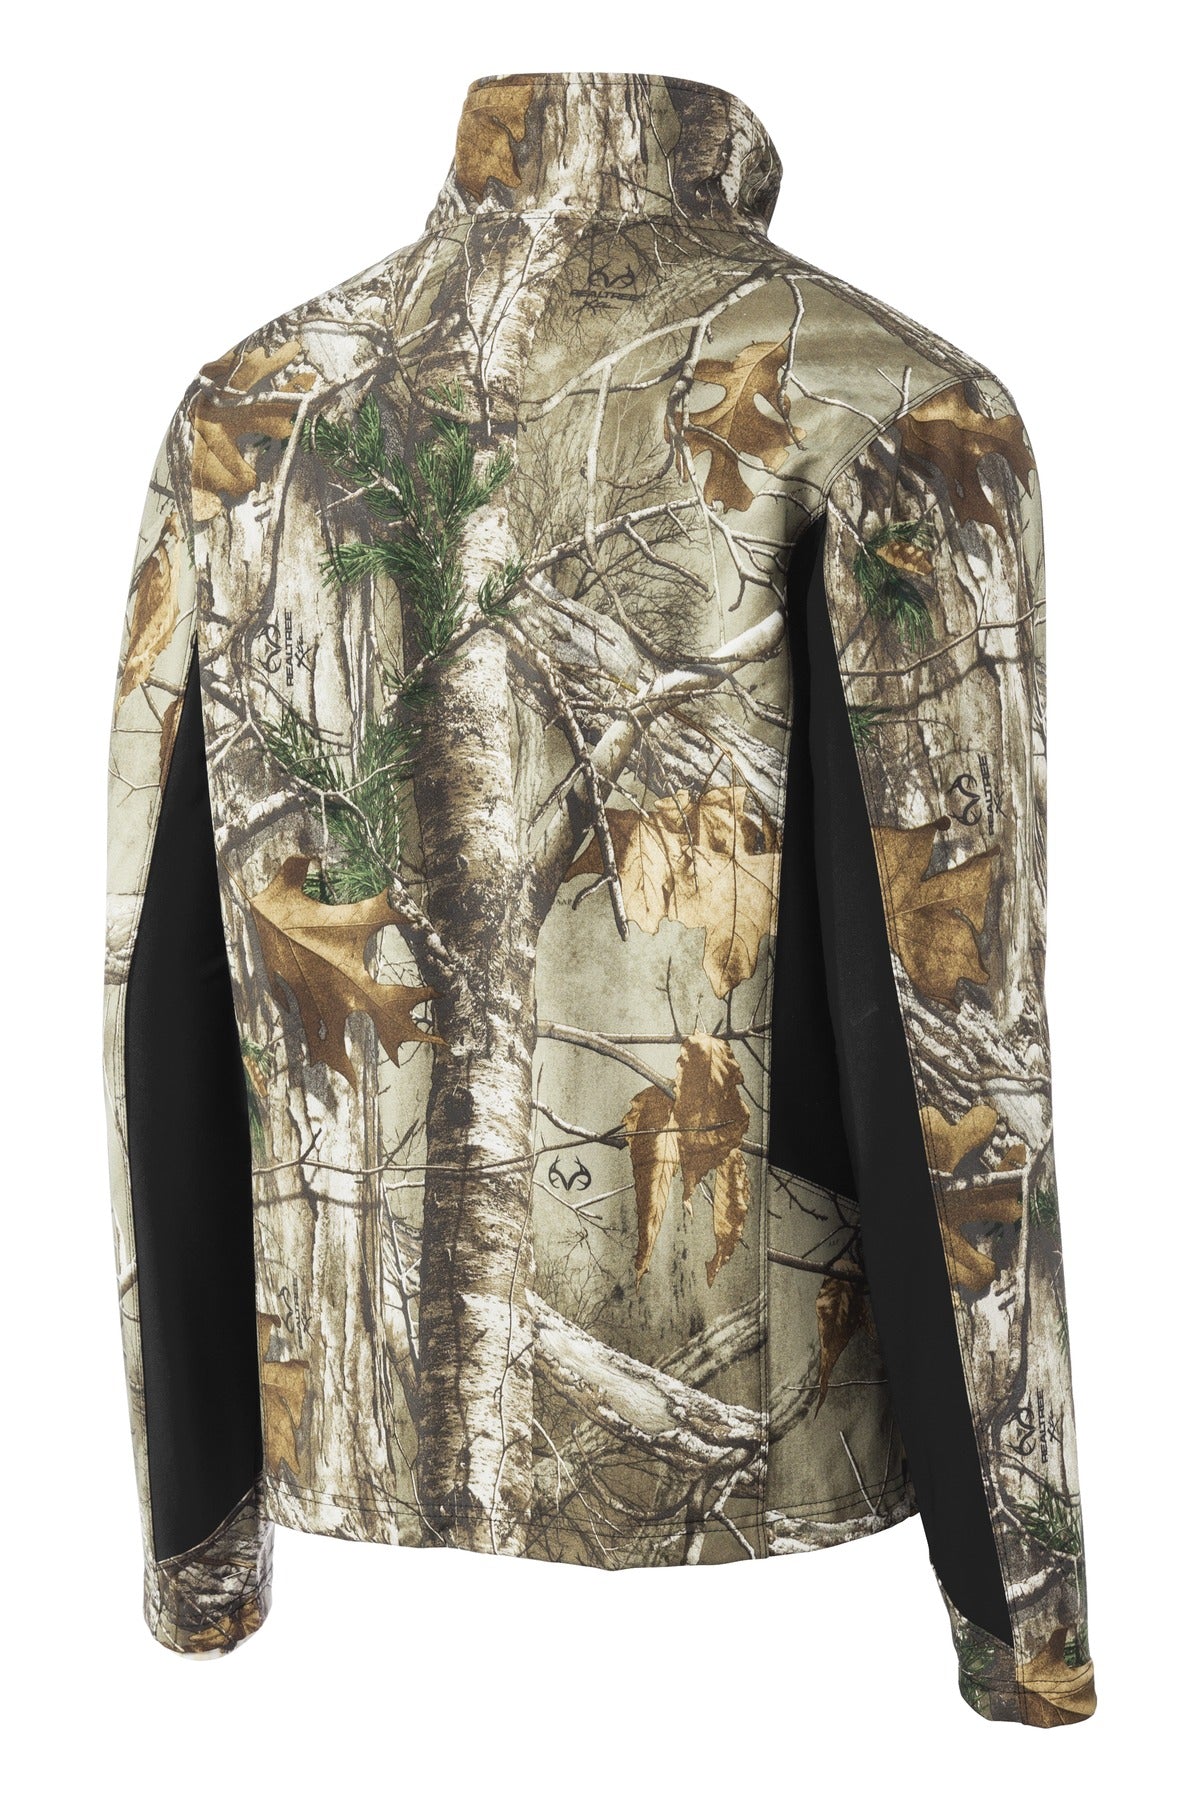 Port Authority Camouflage Colorblock Soft Shell. J318C